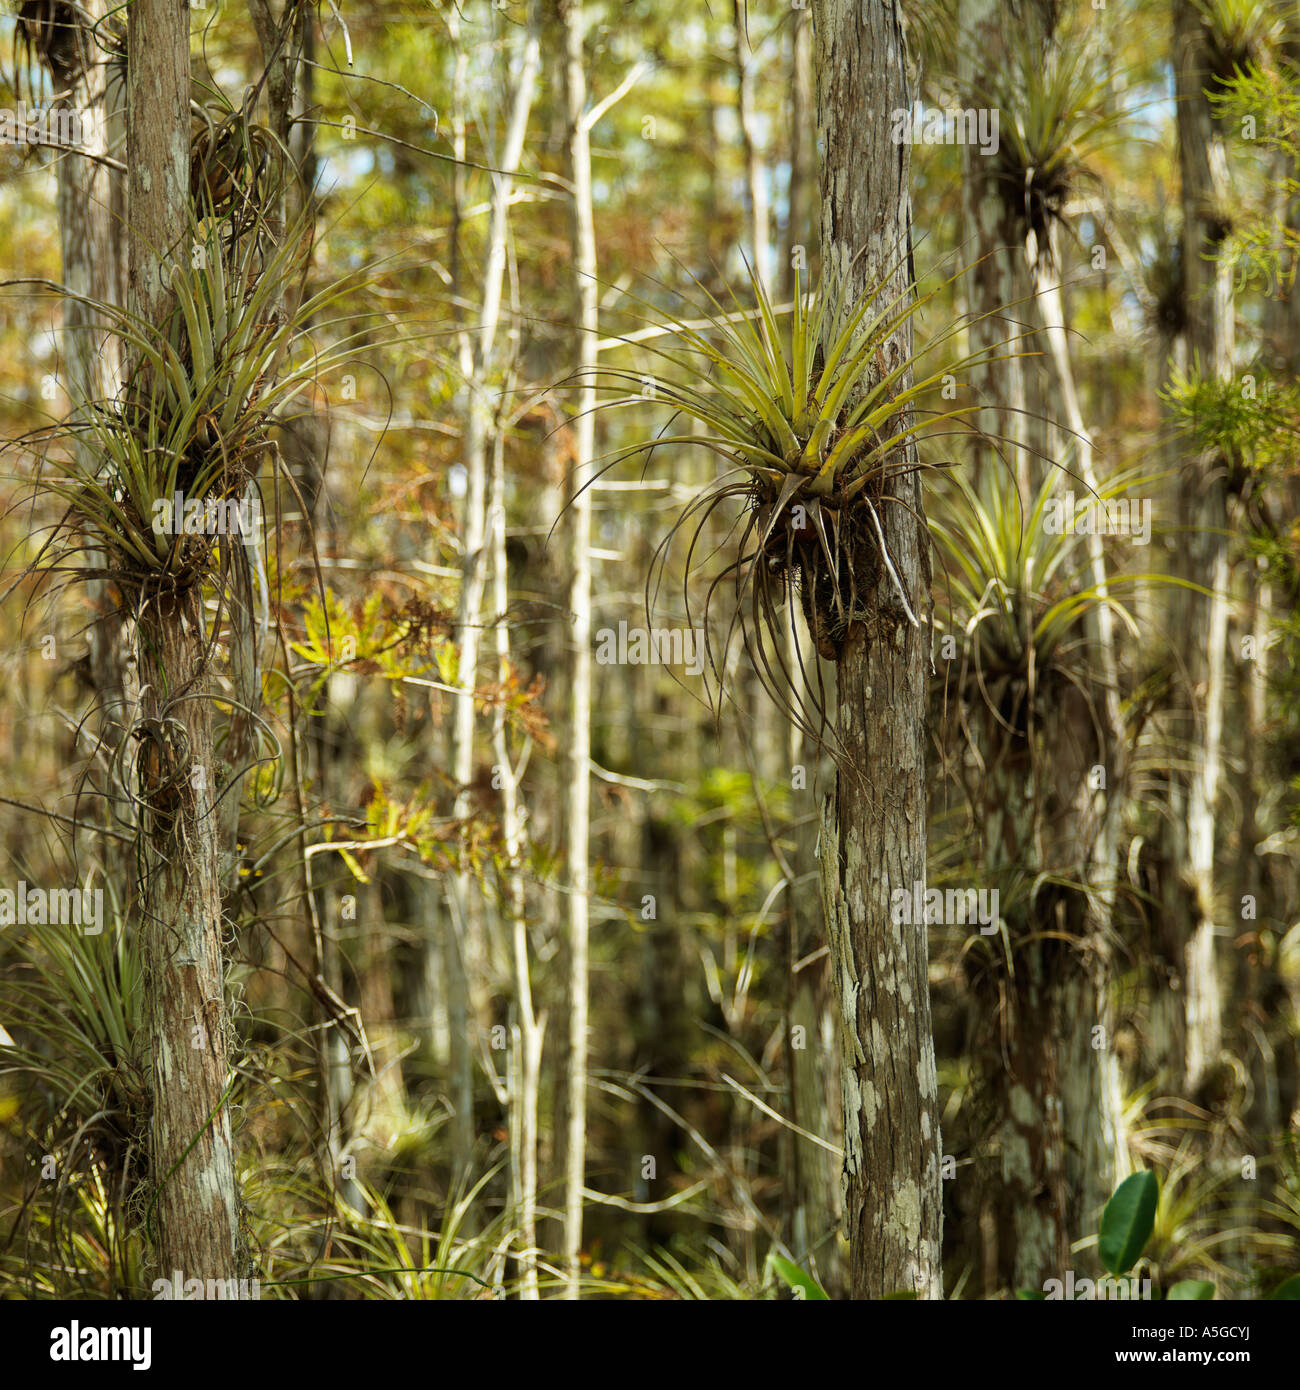 Airplants growing on cypress trees in Everglades National Park Florida USA Stock Photo